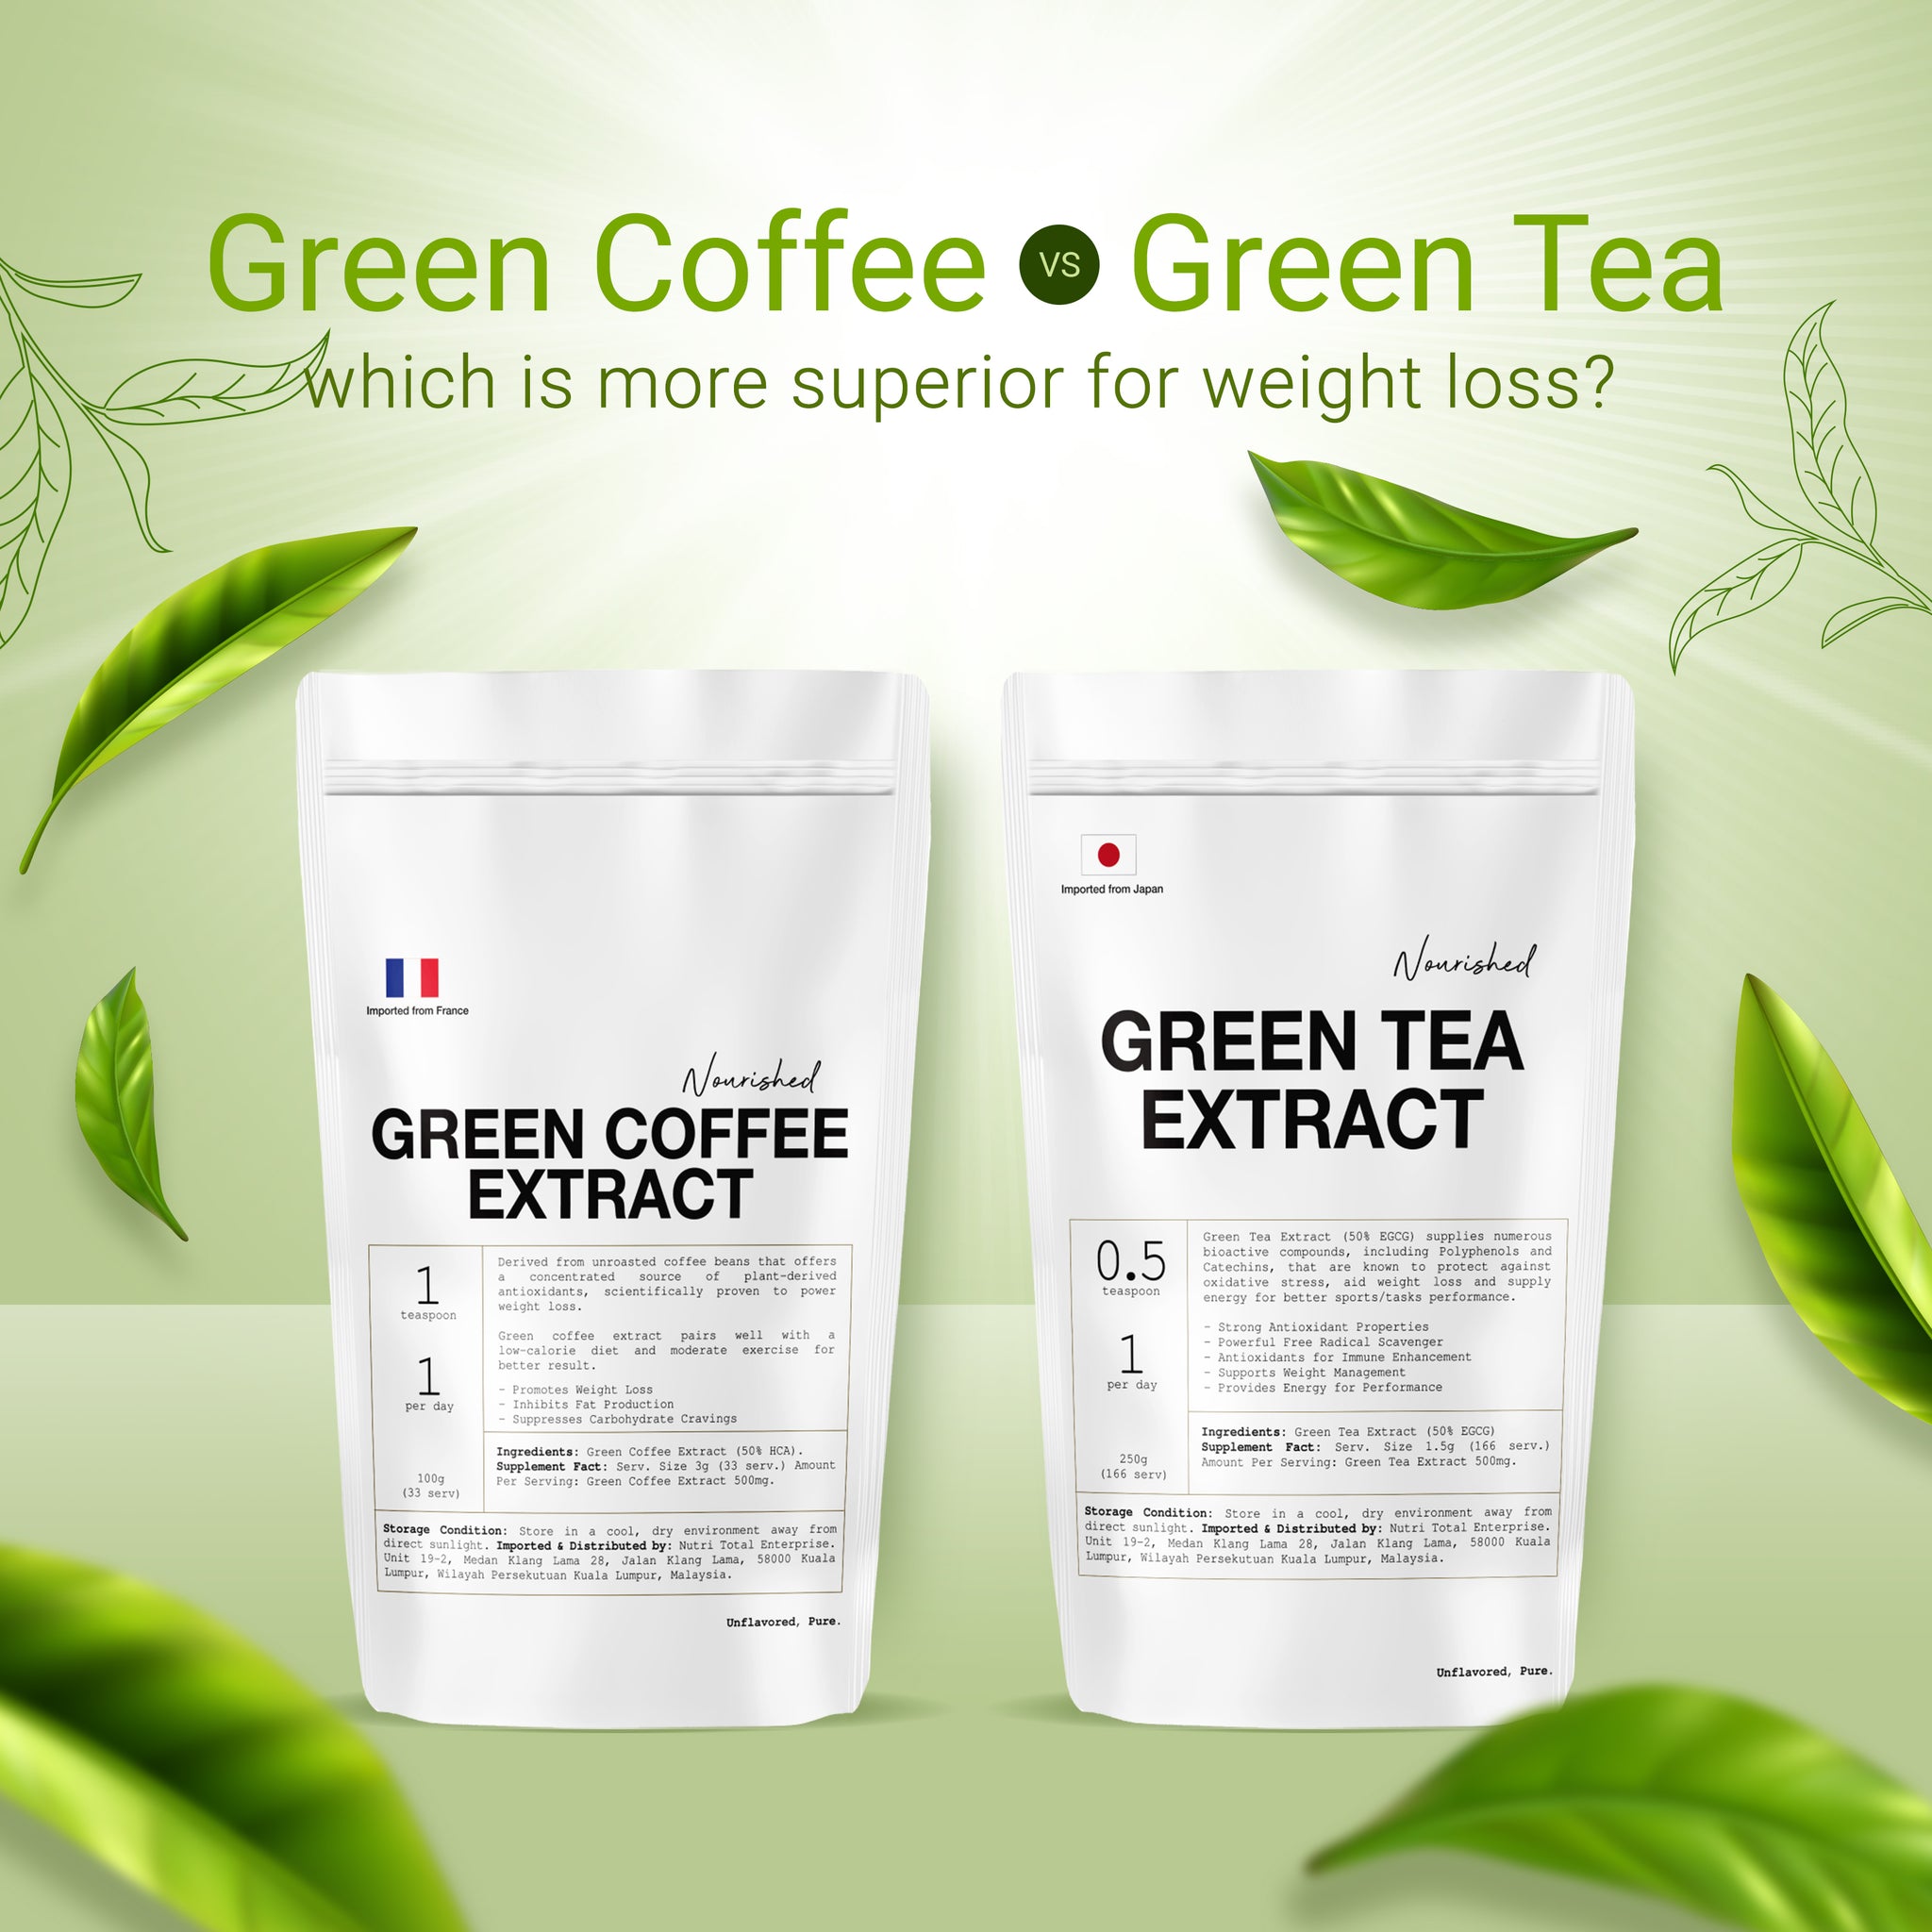 Which Is Better for Weight Loss? Green Coffee or Green Tea Extract?